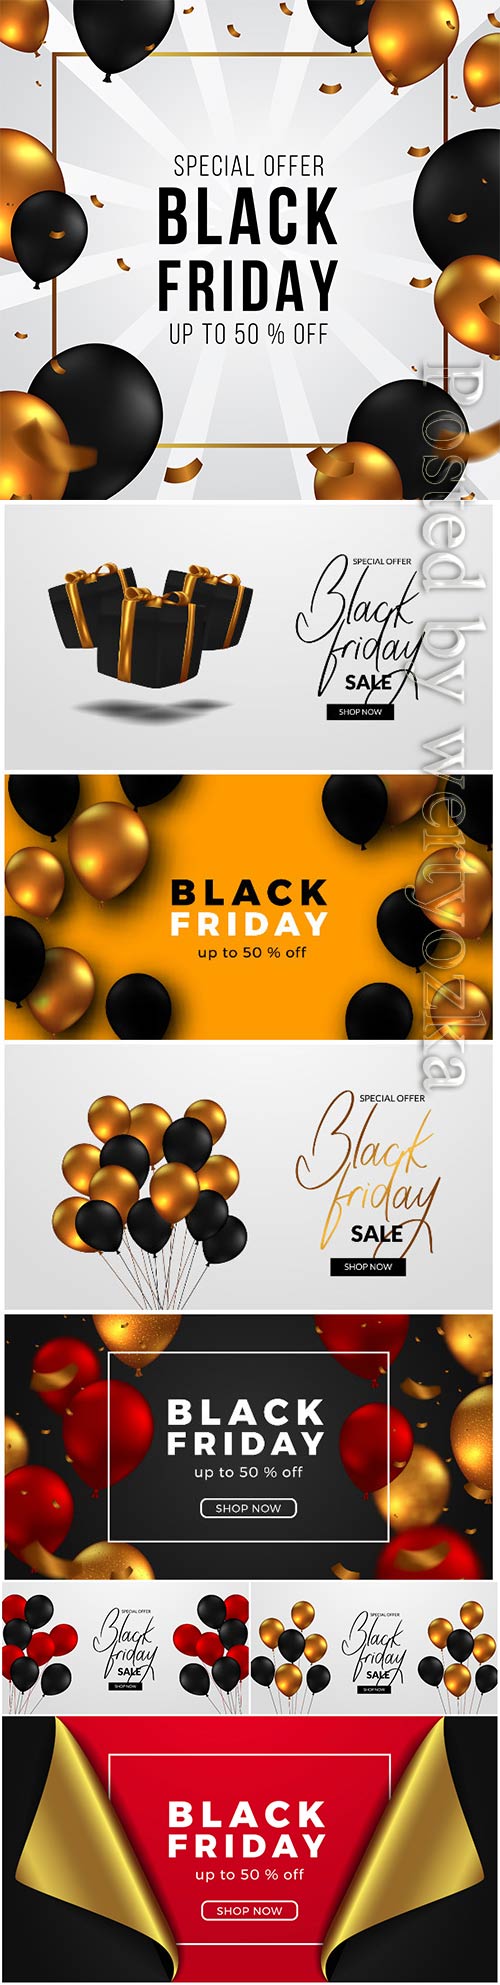 Black friday sale, red and golden balloon premium vector